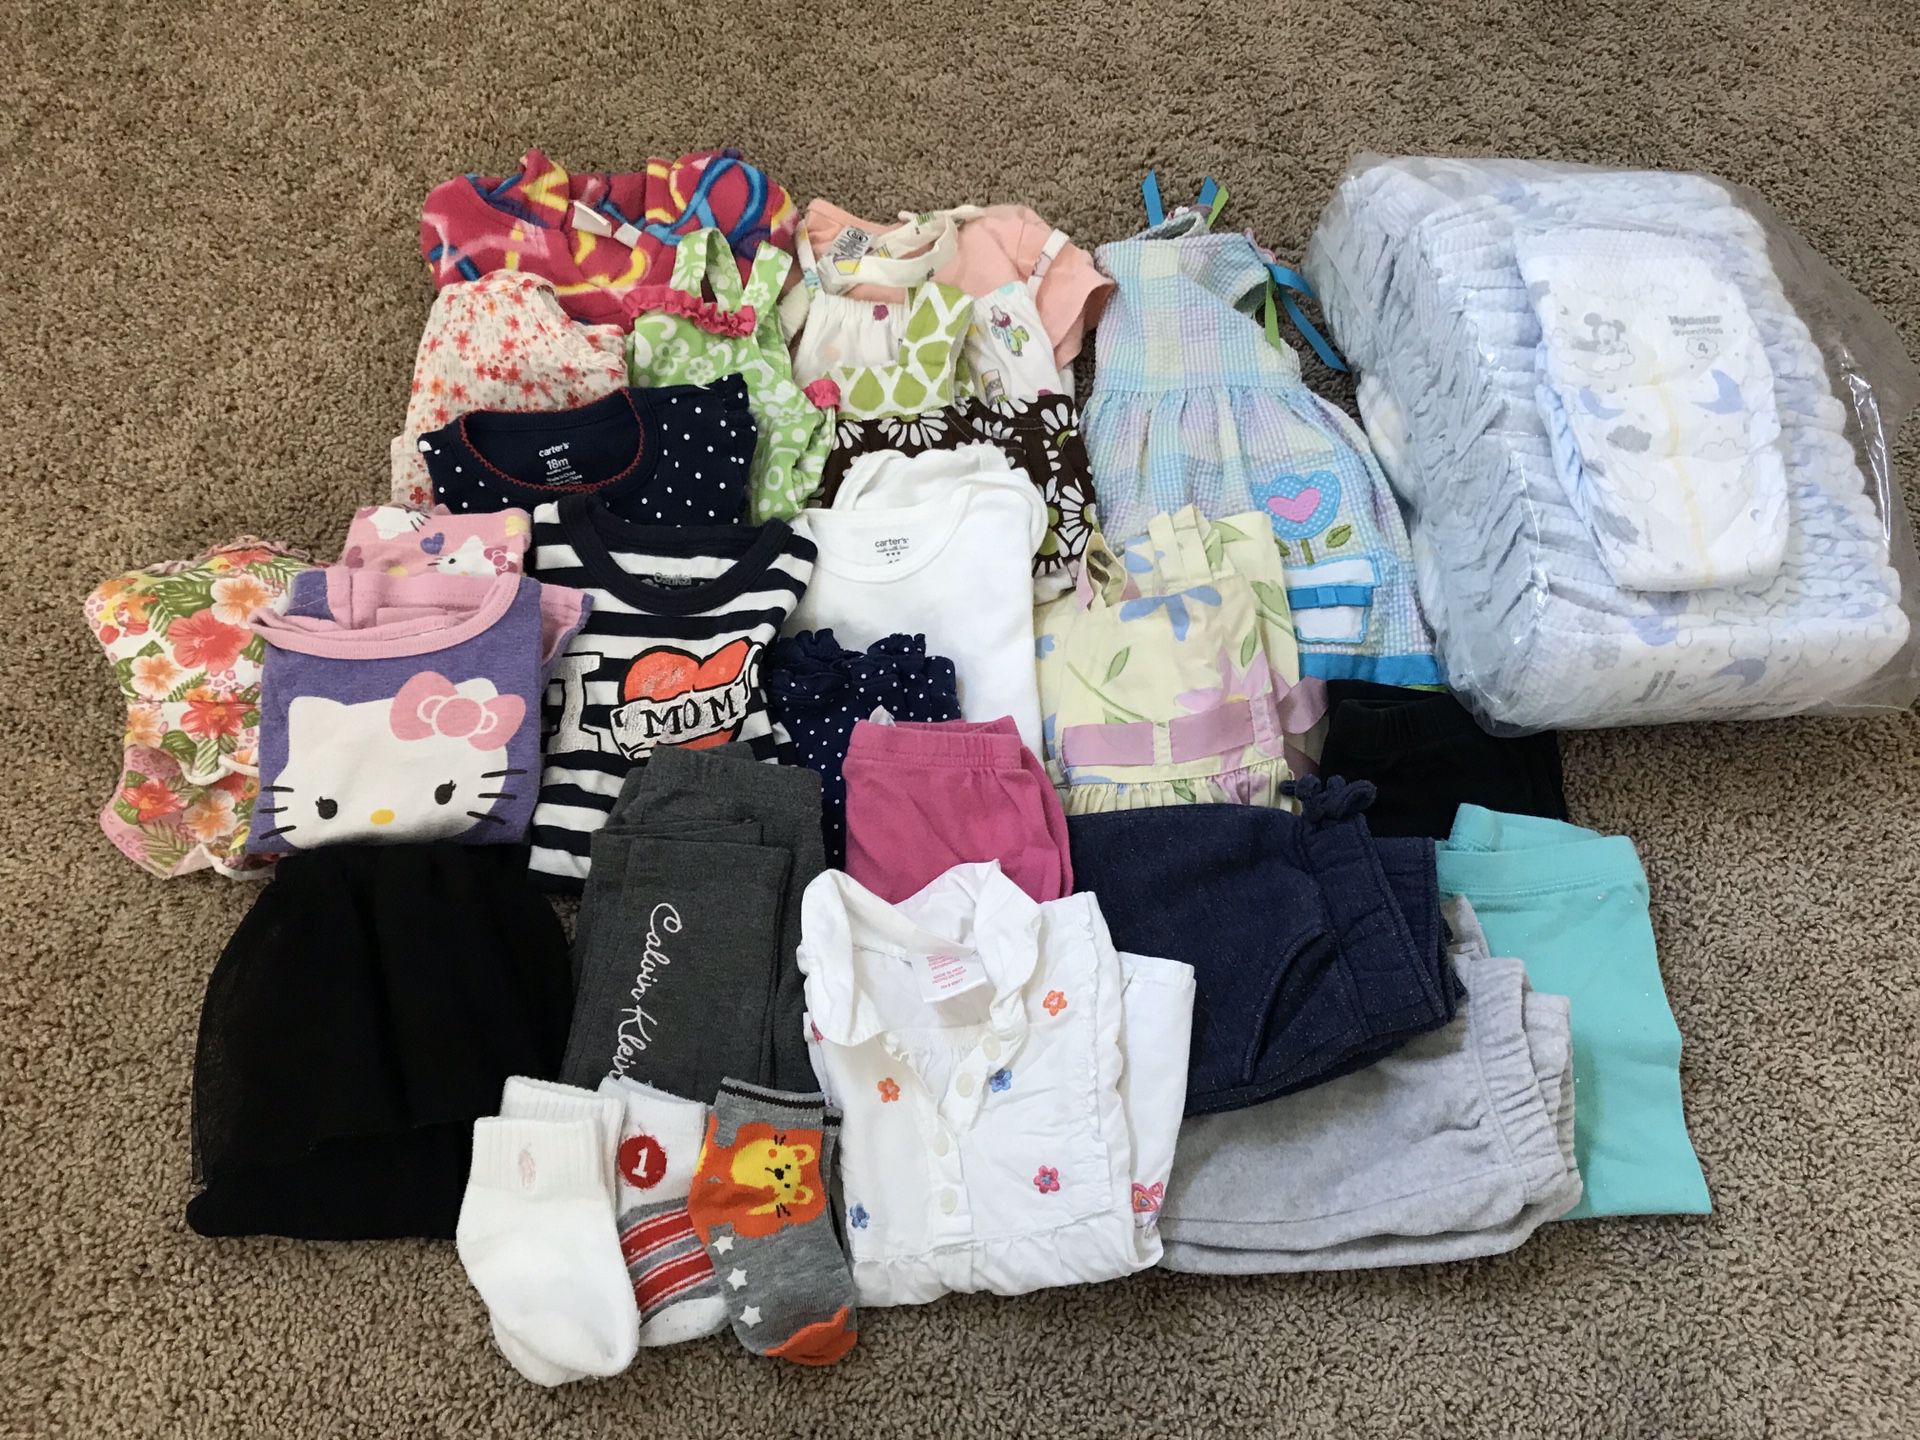 18 months baby girl clothes and size 4 overnight diapers (28) and swim diapers